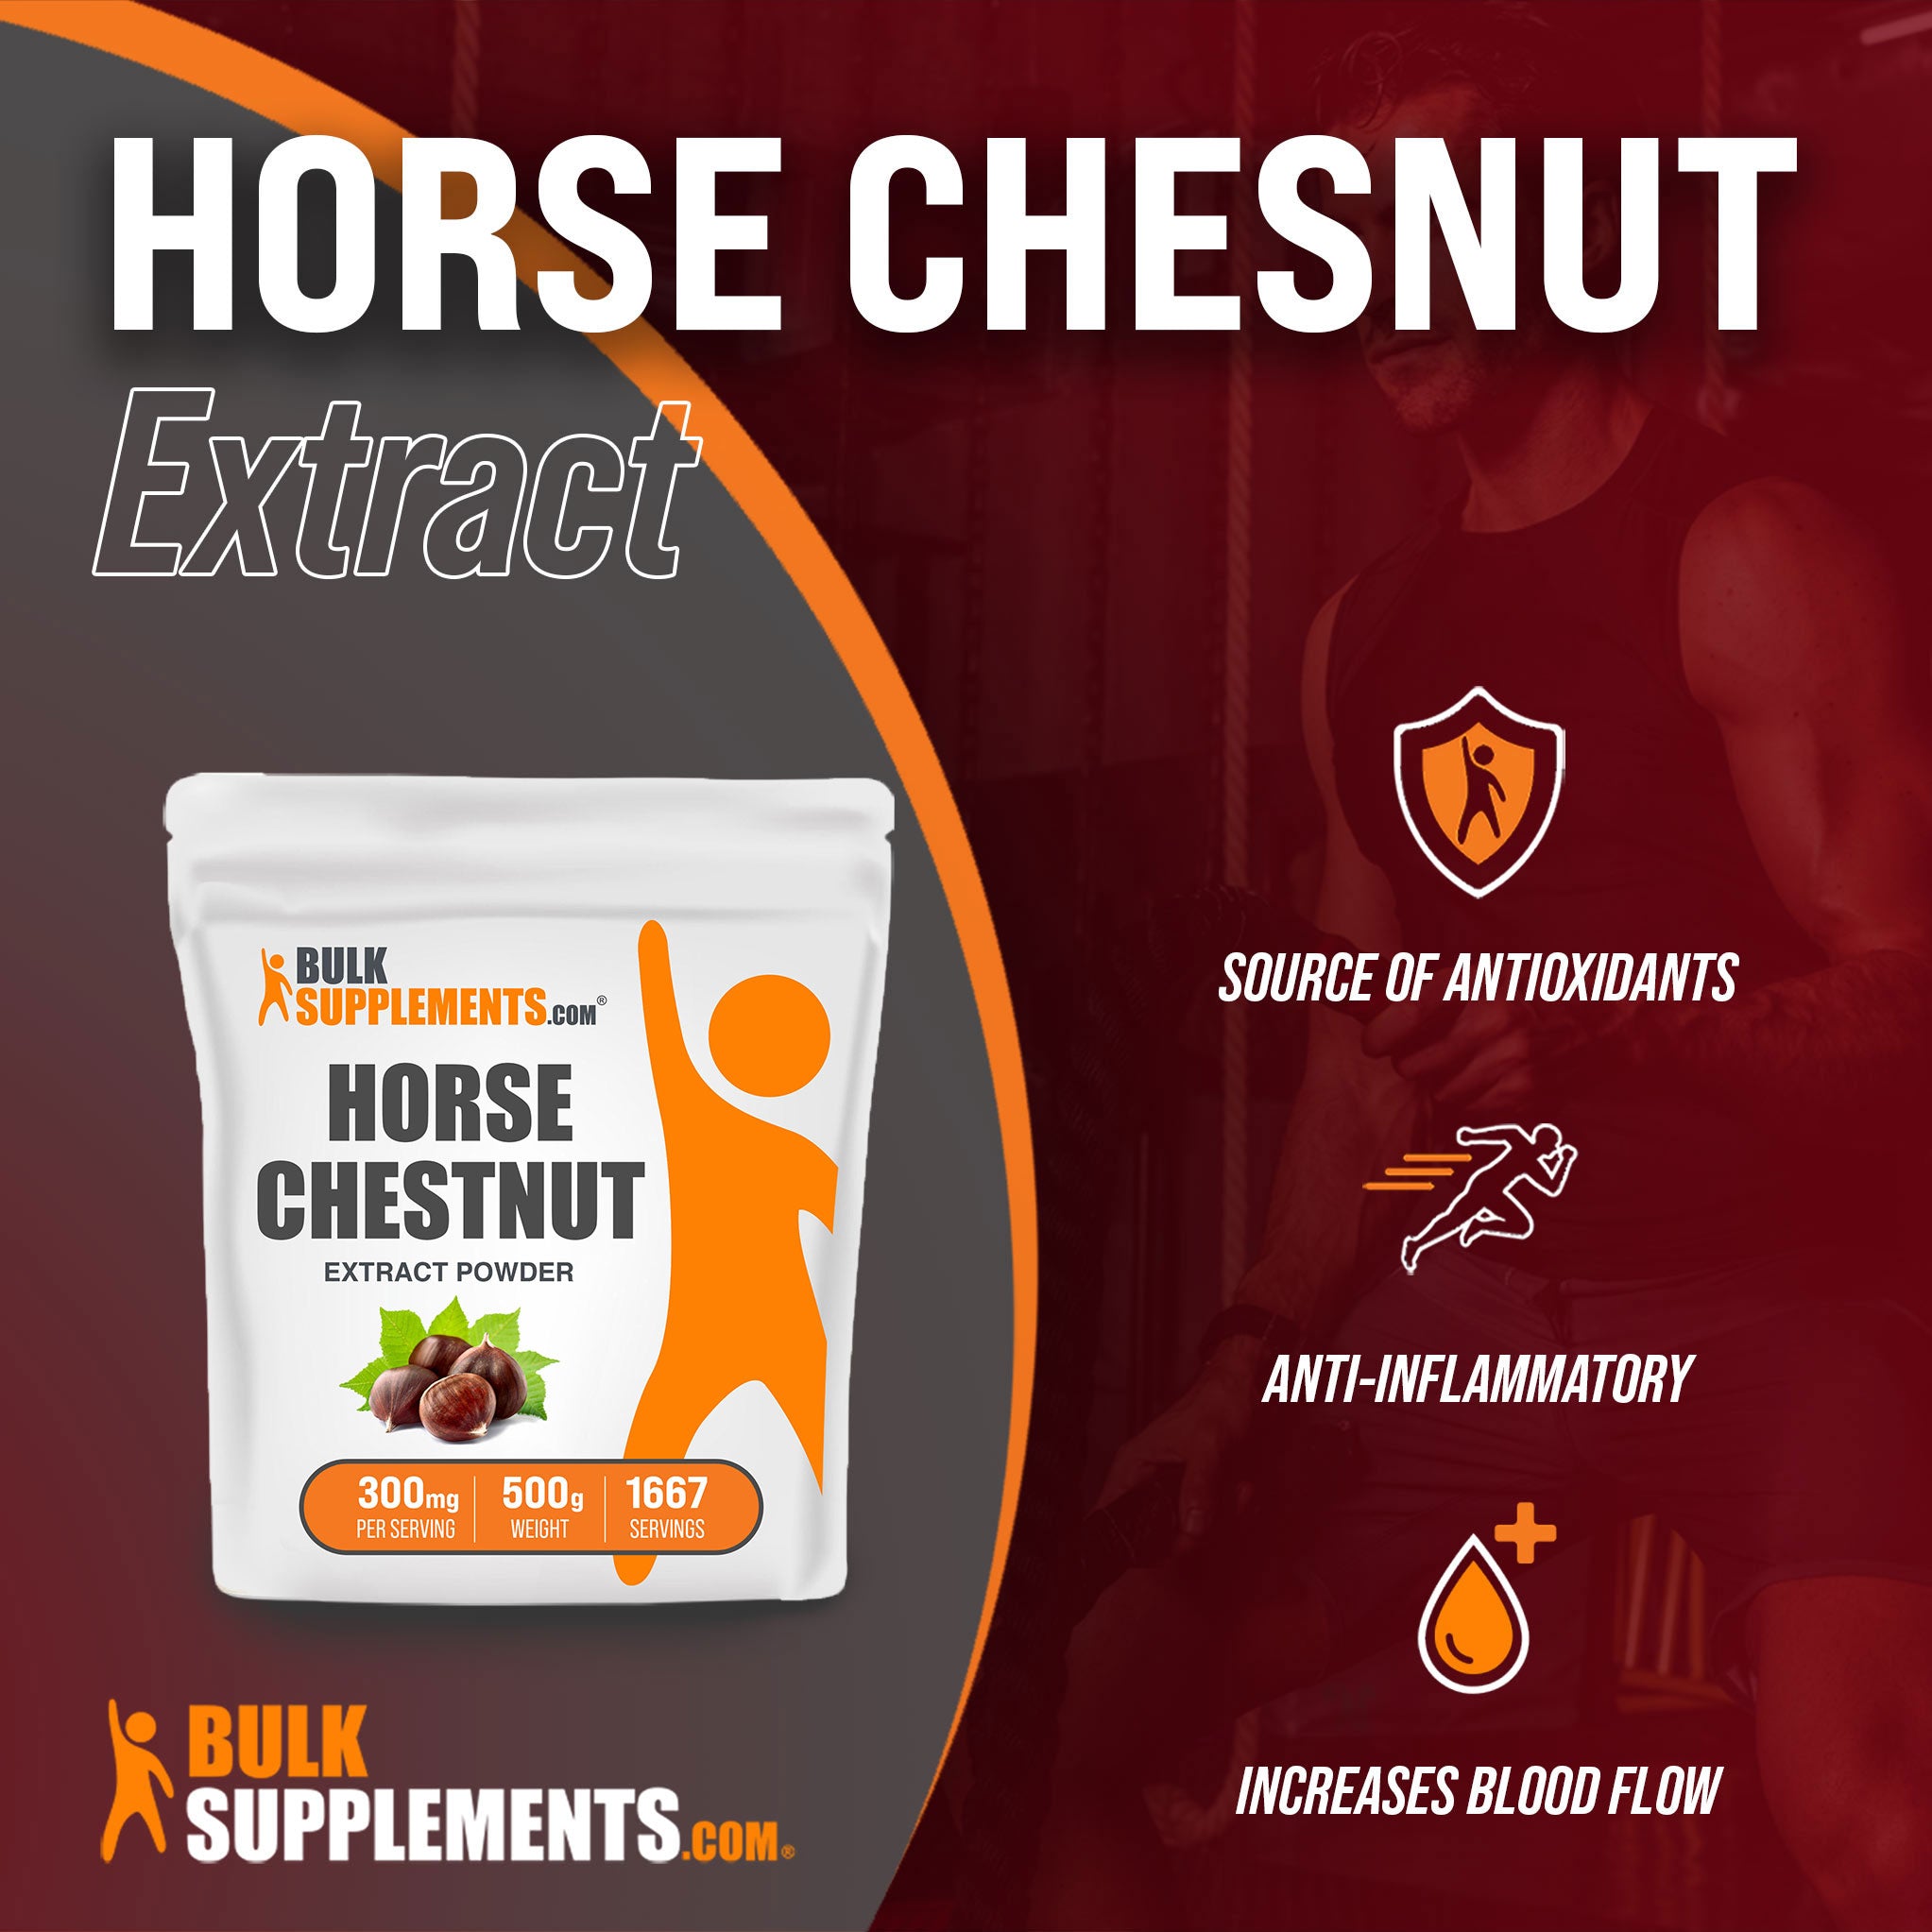 Benefits of Horse Chestnut Extract; source of antioxidants, anti-inflammatory, increases blood flow